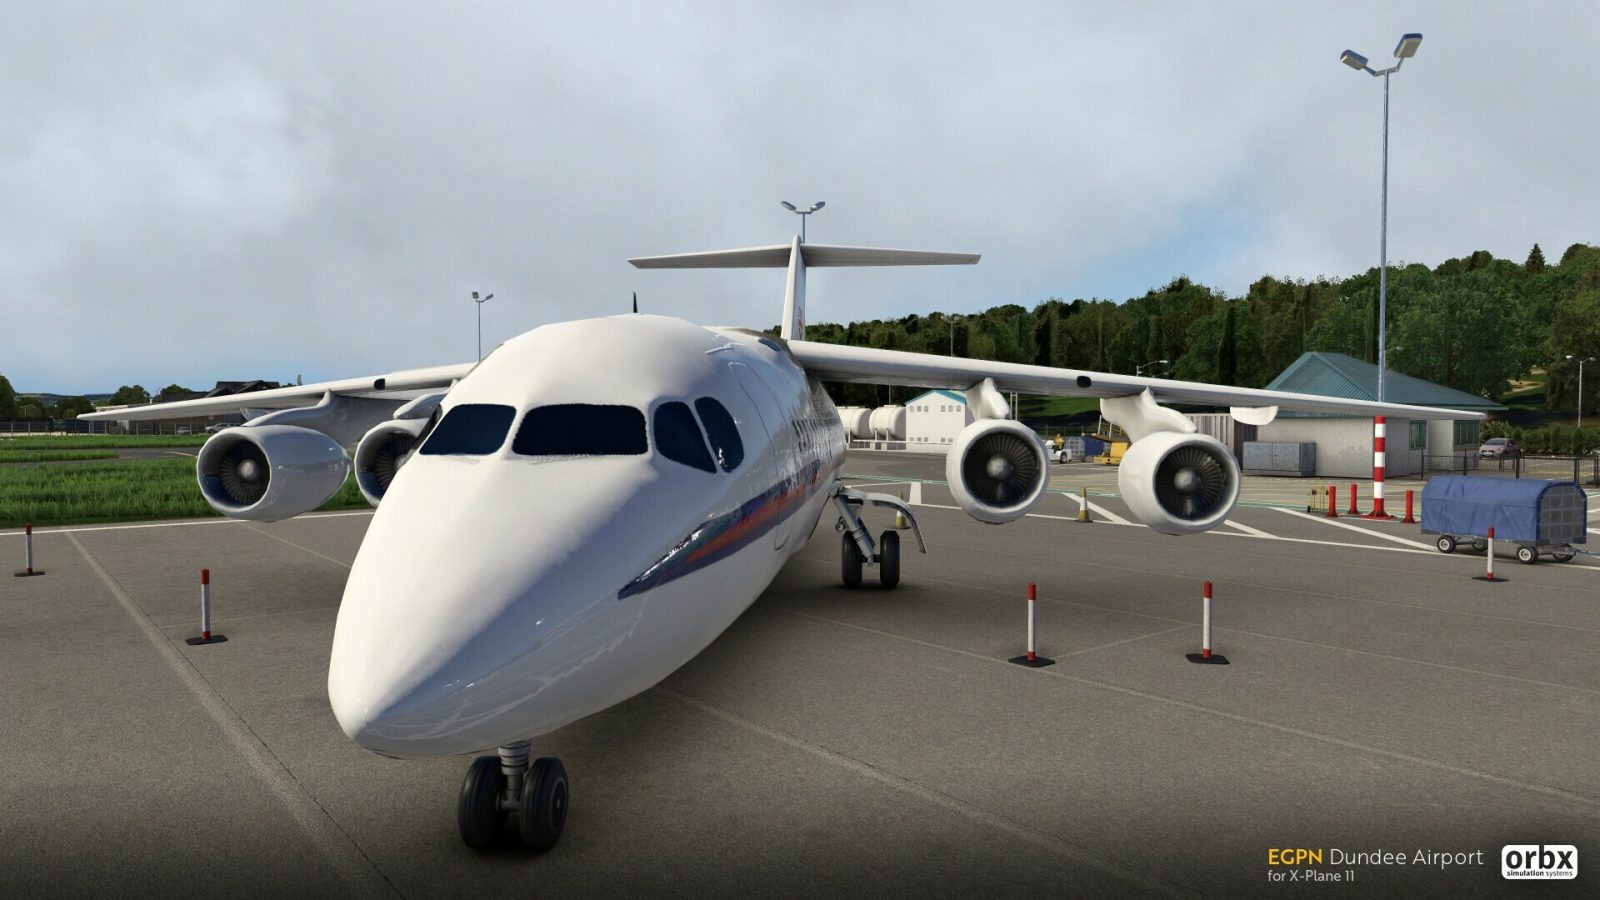 Orbx Dundee Airport-343 